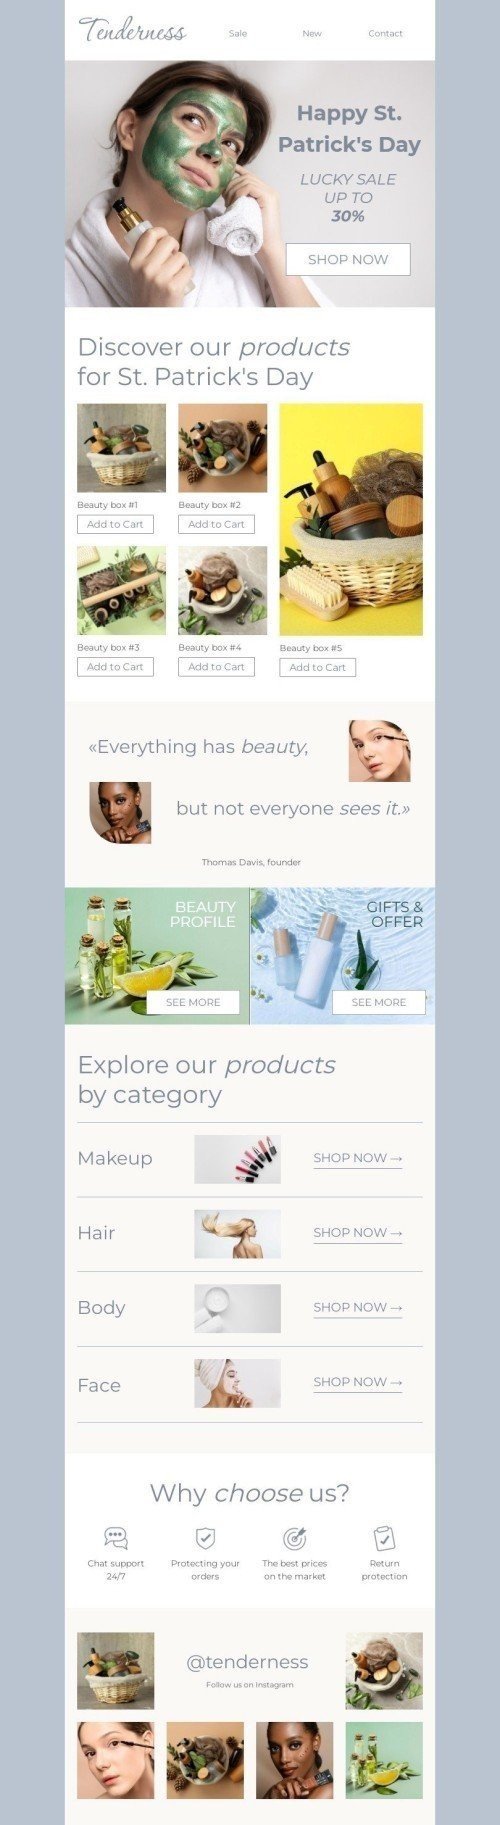 St. Patrick’s Day Email Template "Everything has beauty" for Beauty & Personal Care industry mobile view